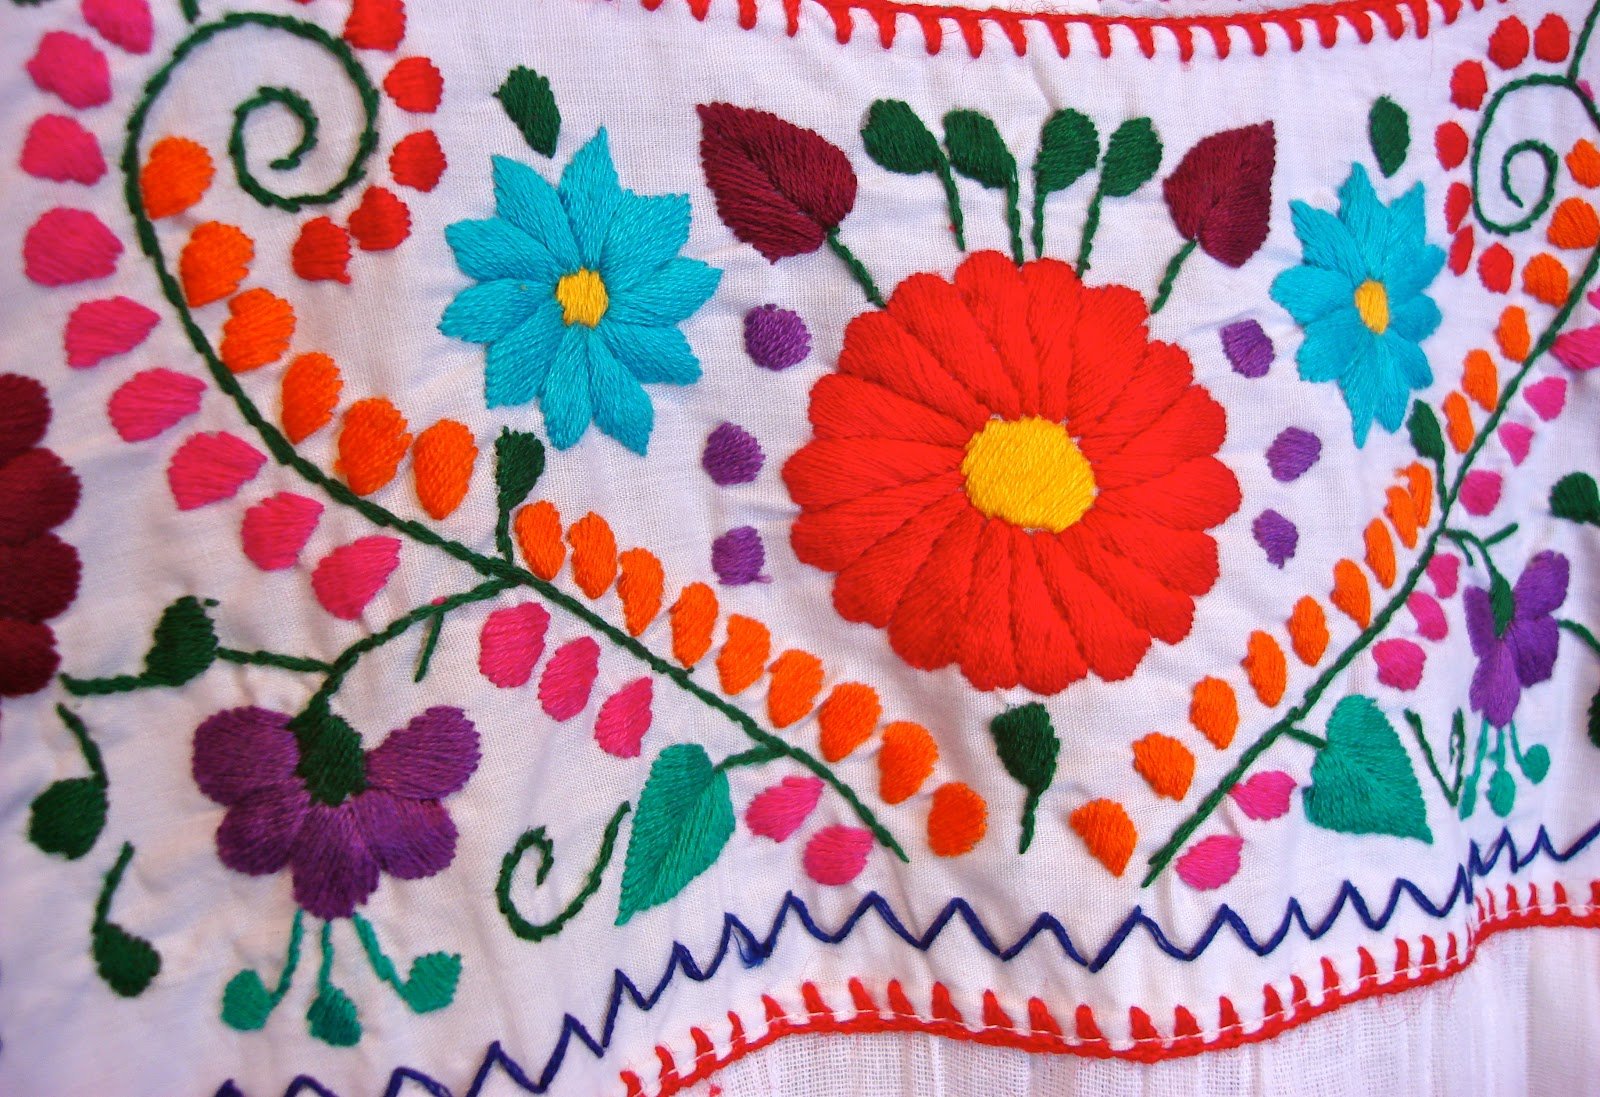 Learn the art of embroidery at an Open Arts Studio class. Photo: St. Matthew's Cathedral Arts